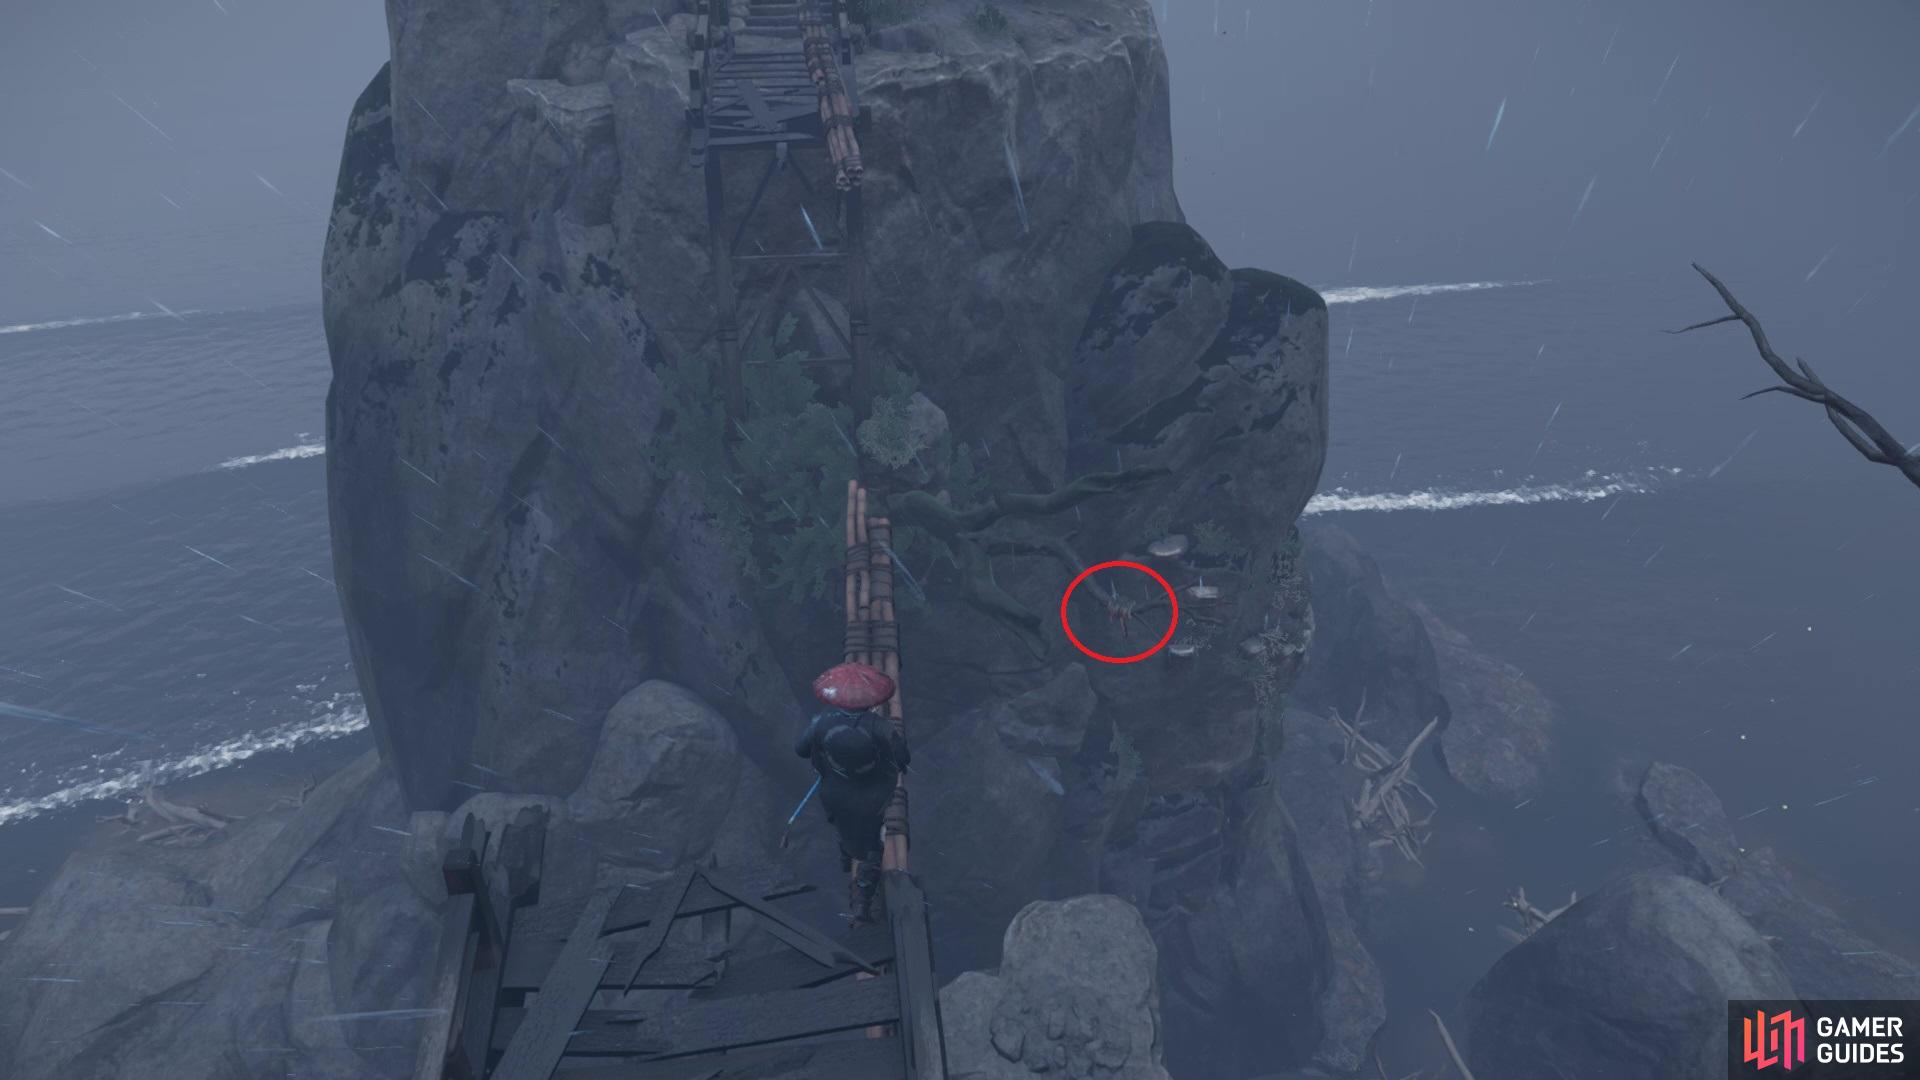 When you get to this spot, you need to jump off and grapple to this point